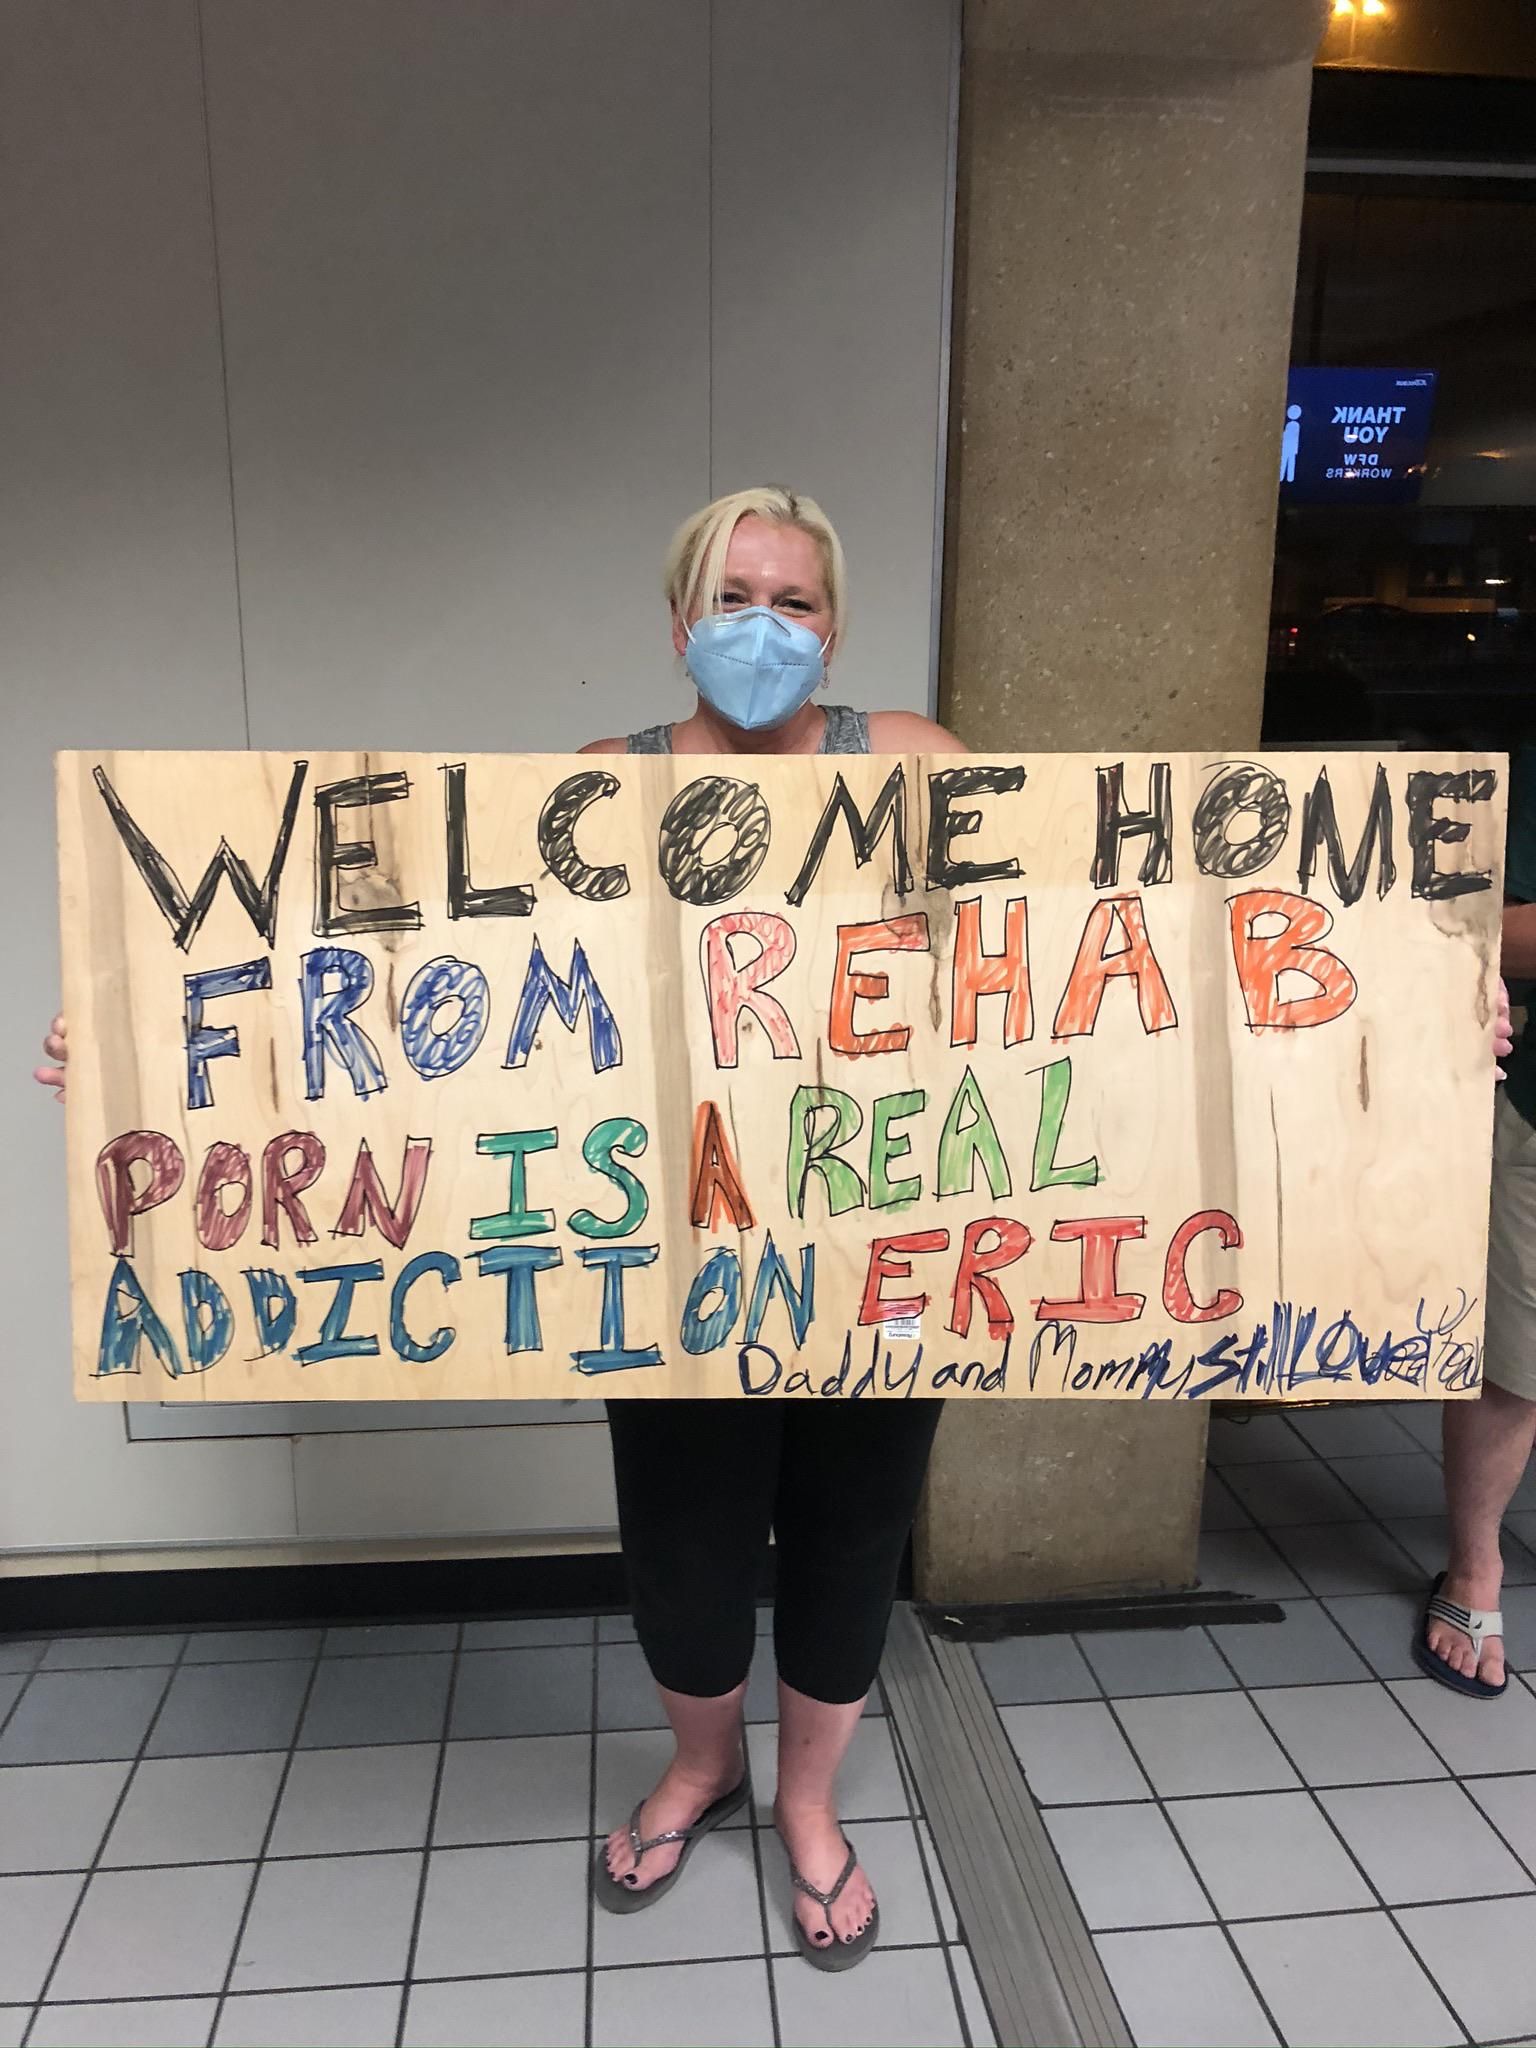 Seen at the airport tonight